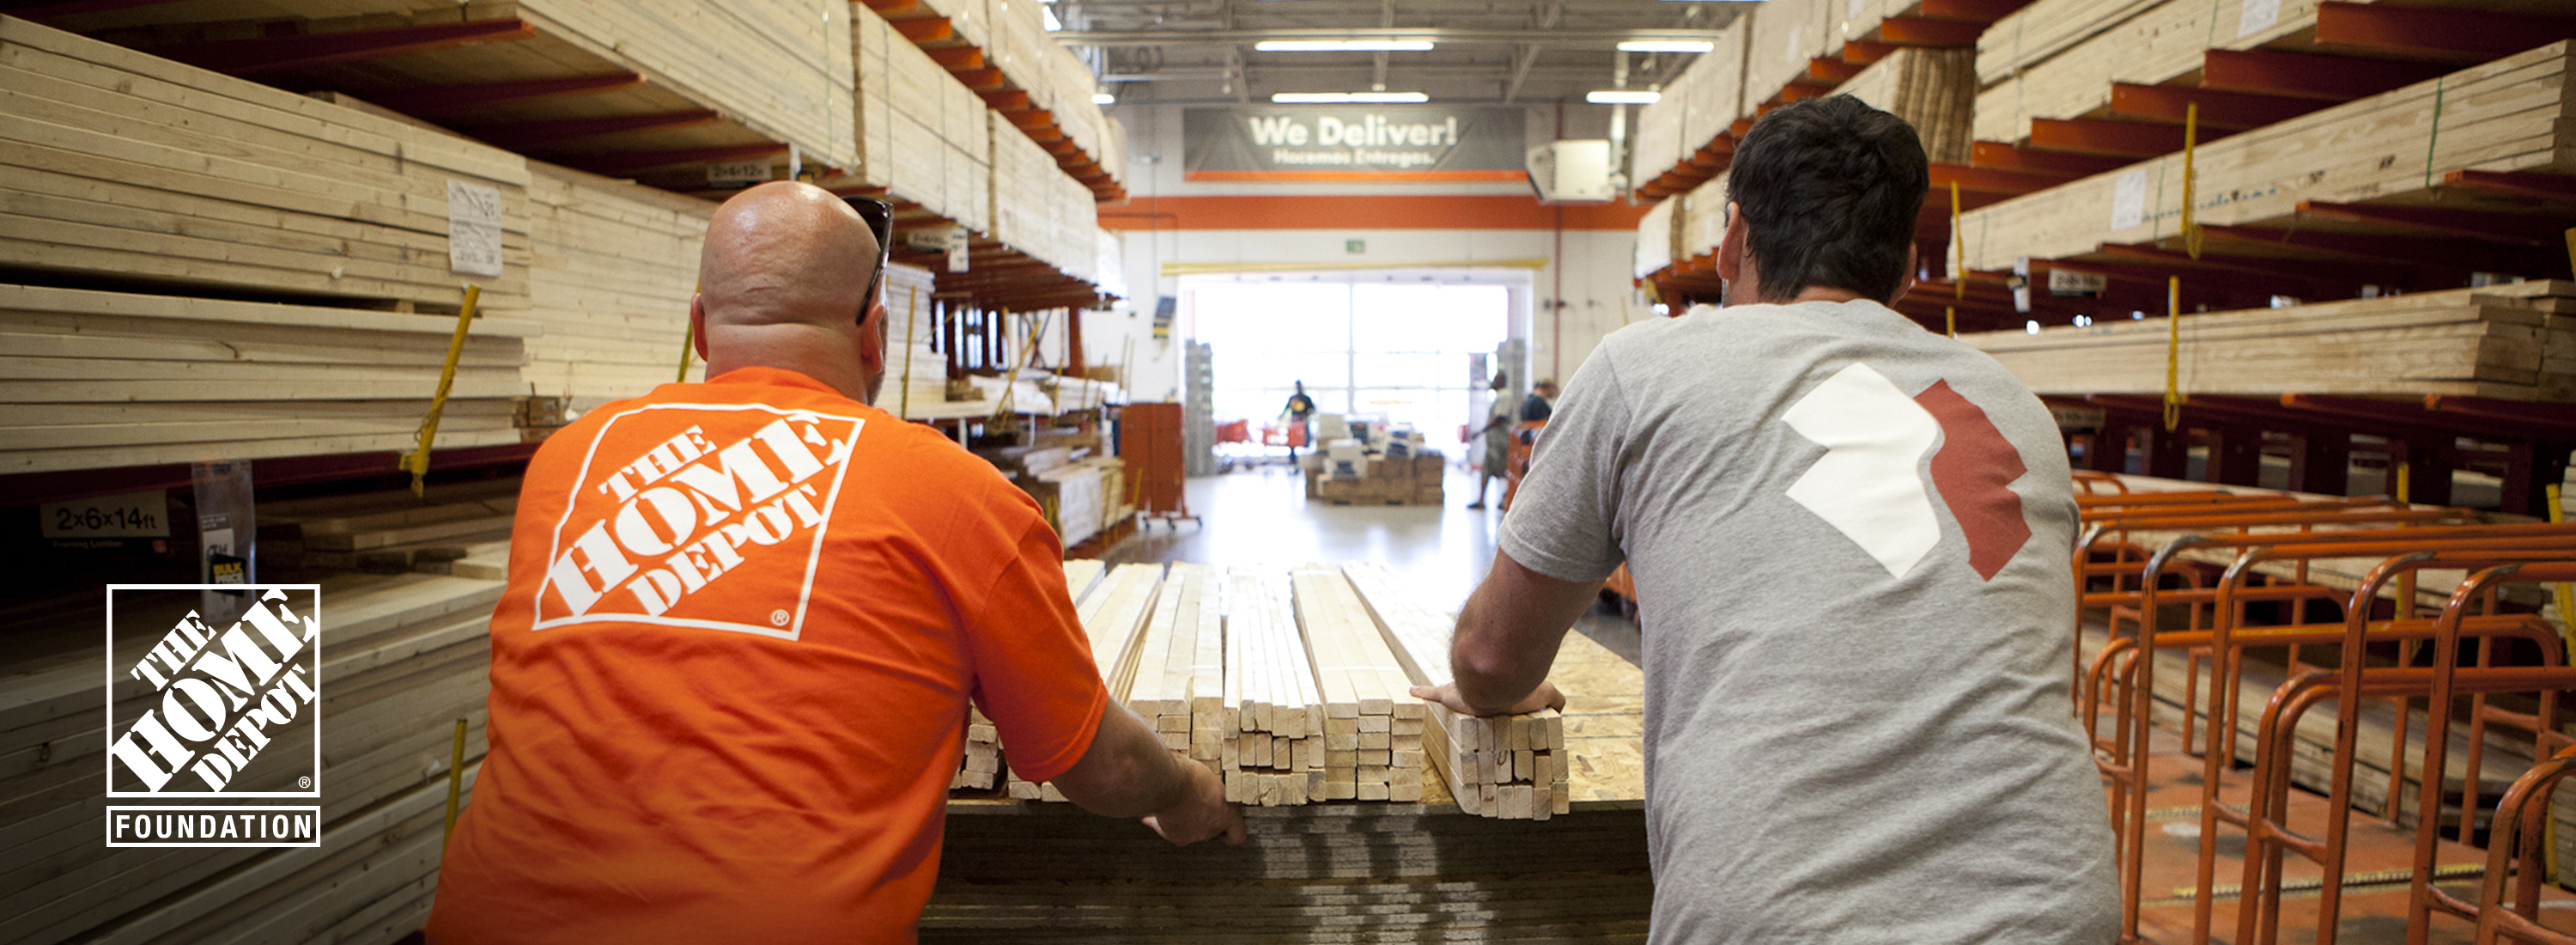 The Home Depot | The Home Depot Foundation - Partnerships